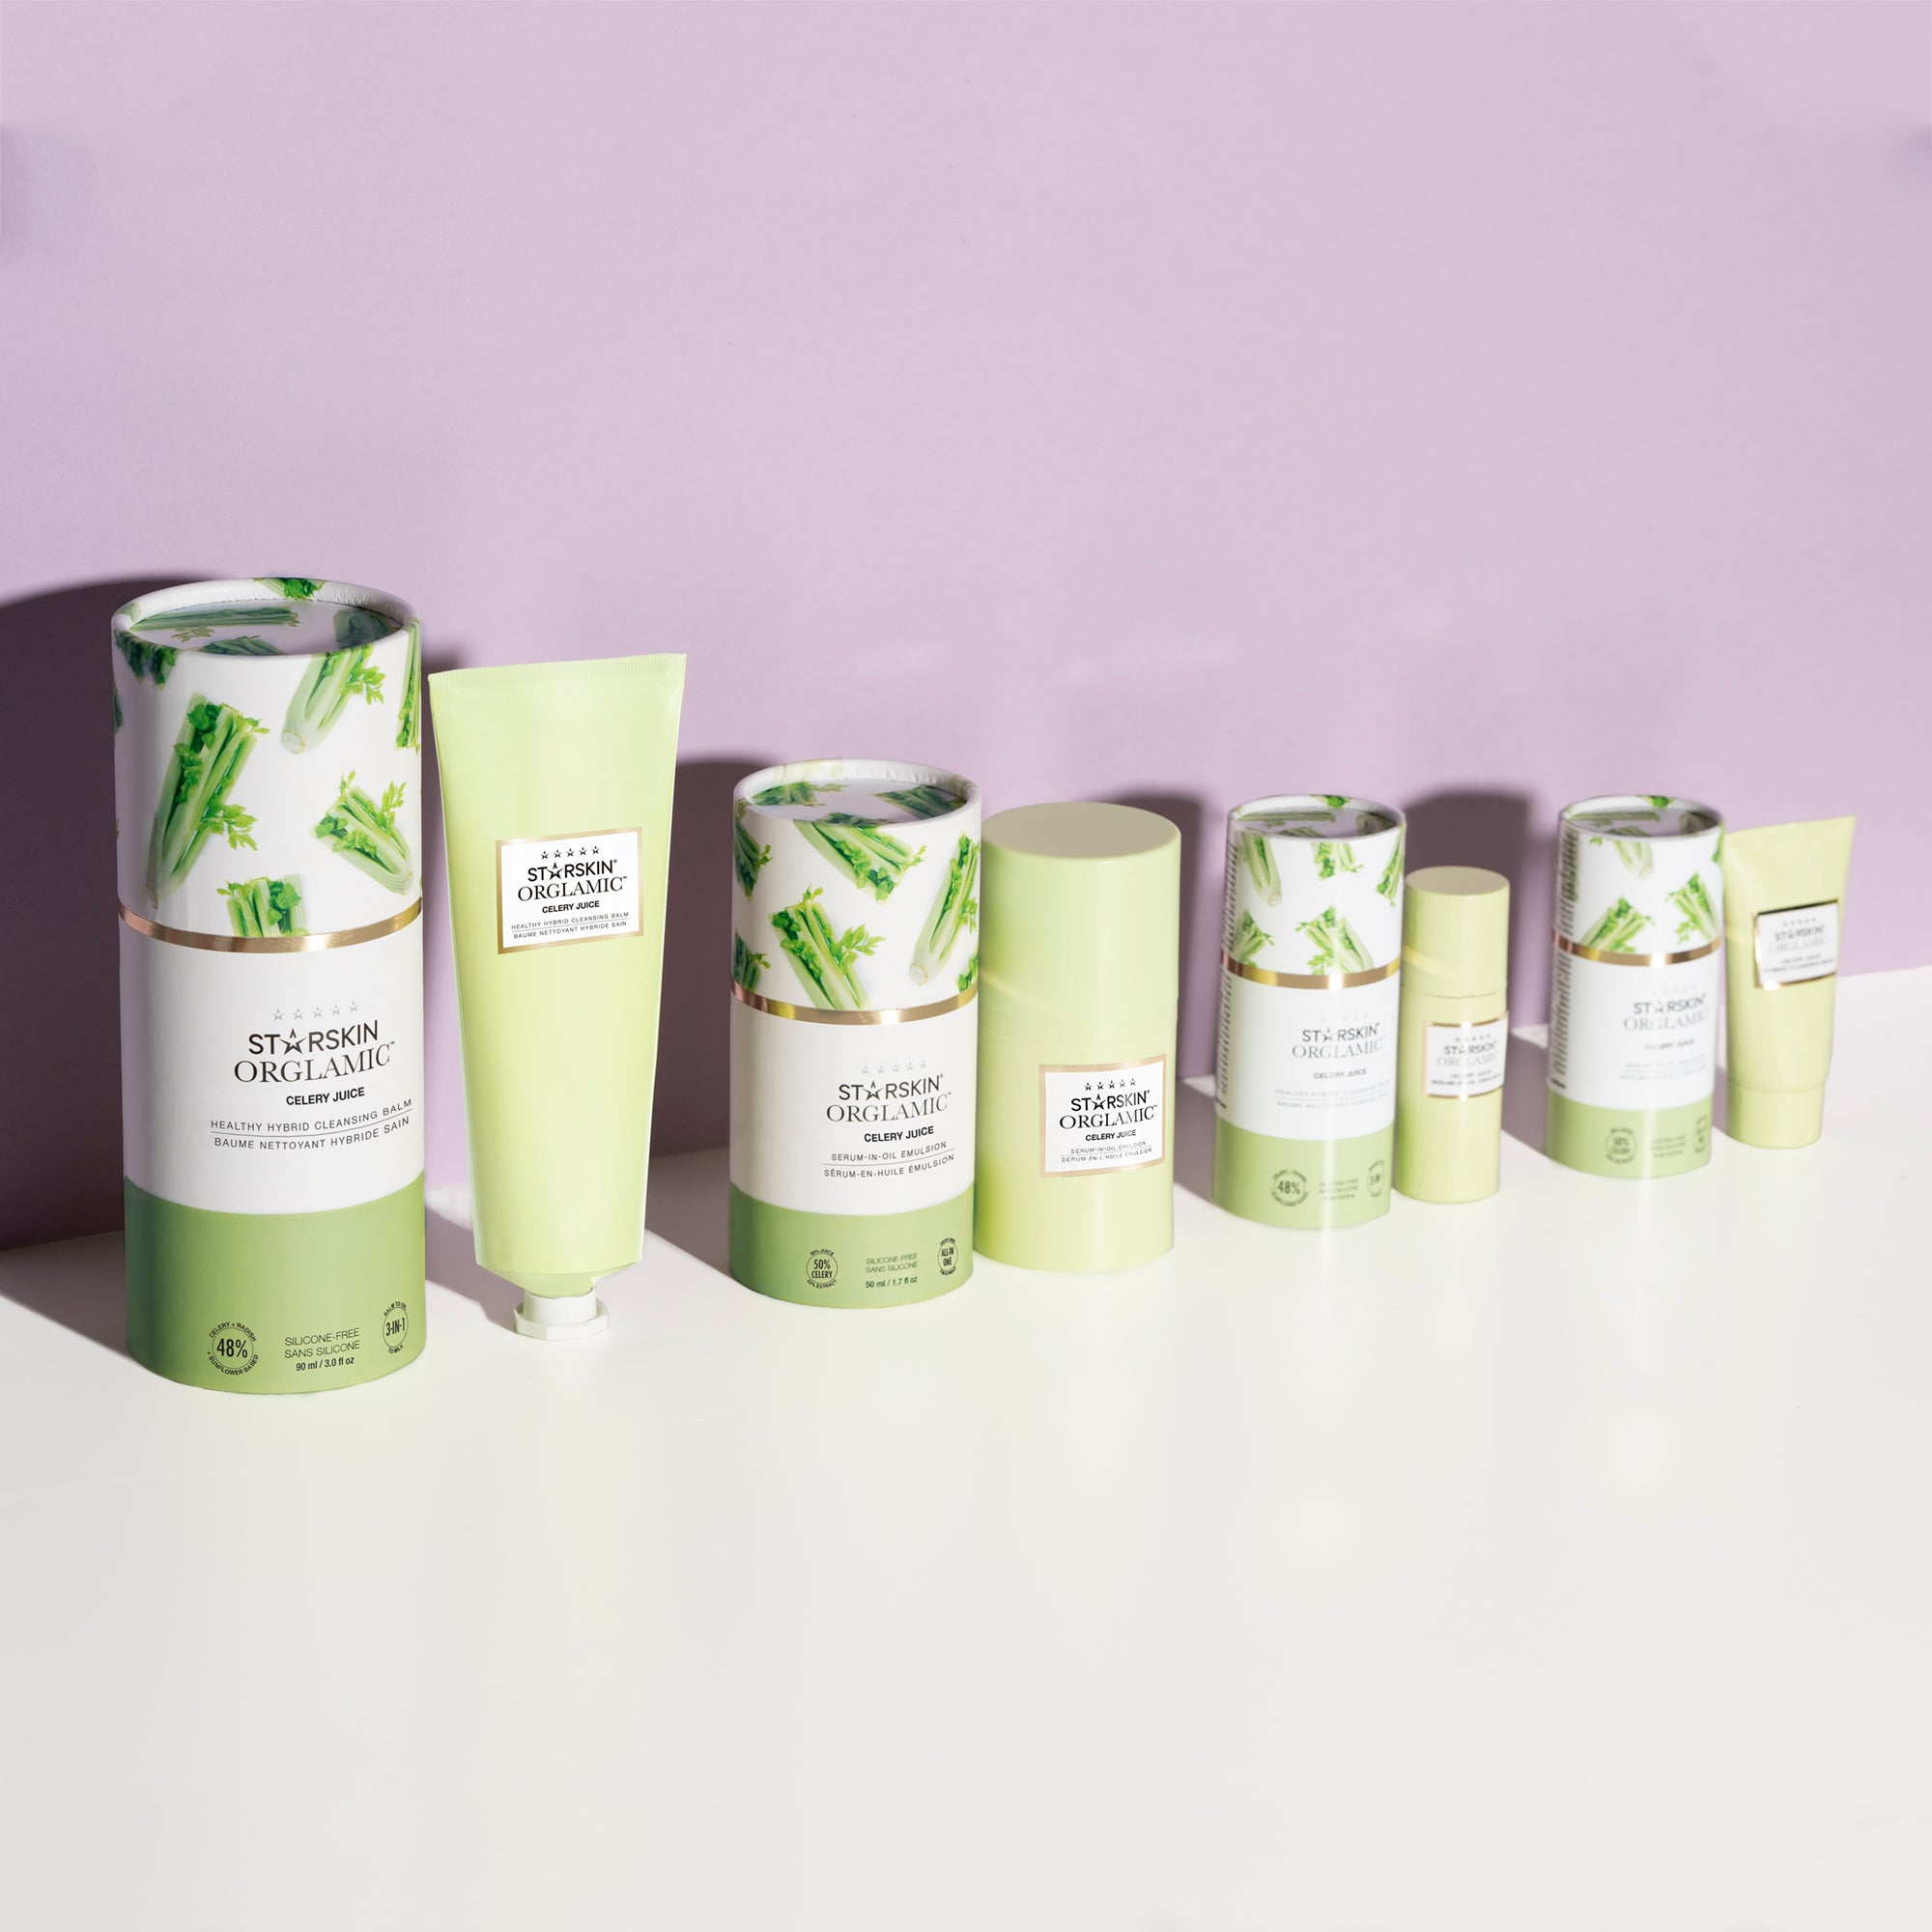 Starskin Orglamic Collection products alligned from left to right on a purple background